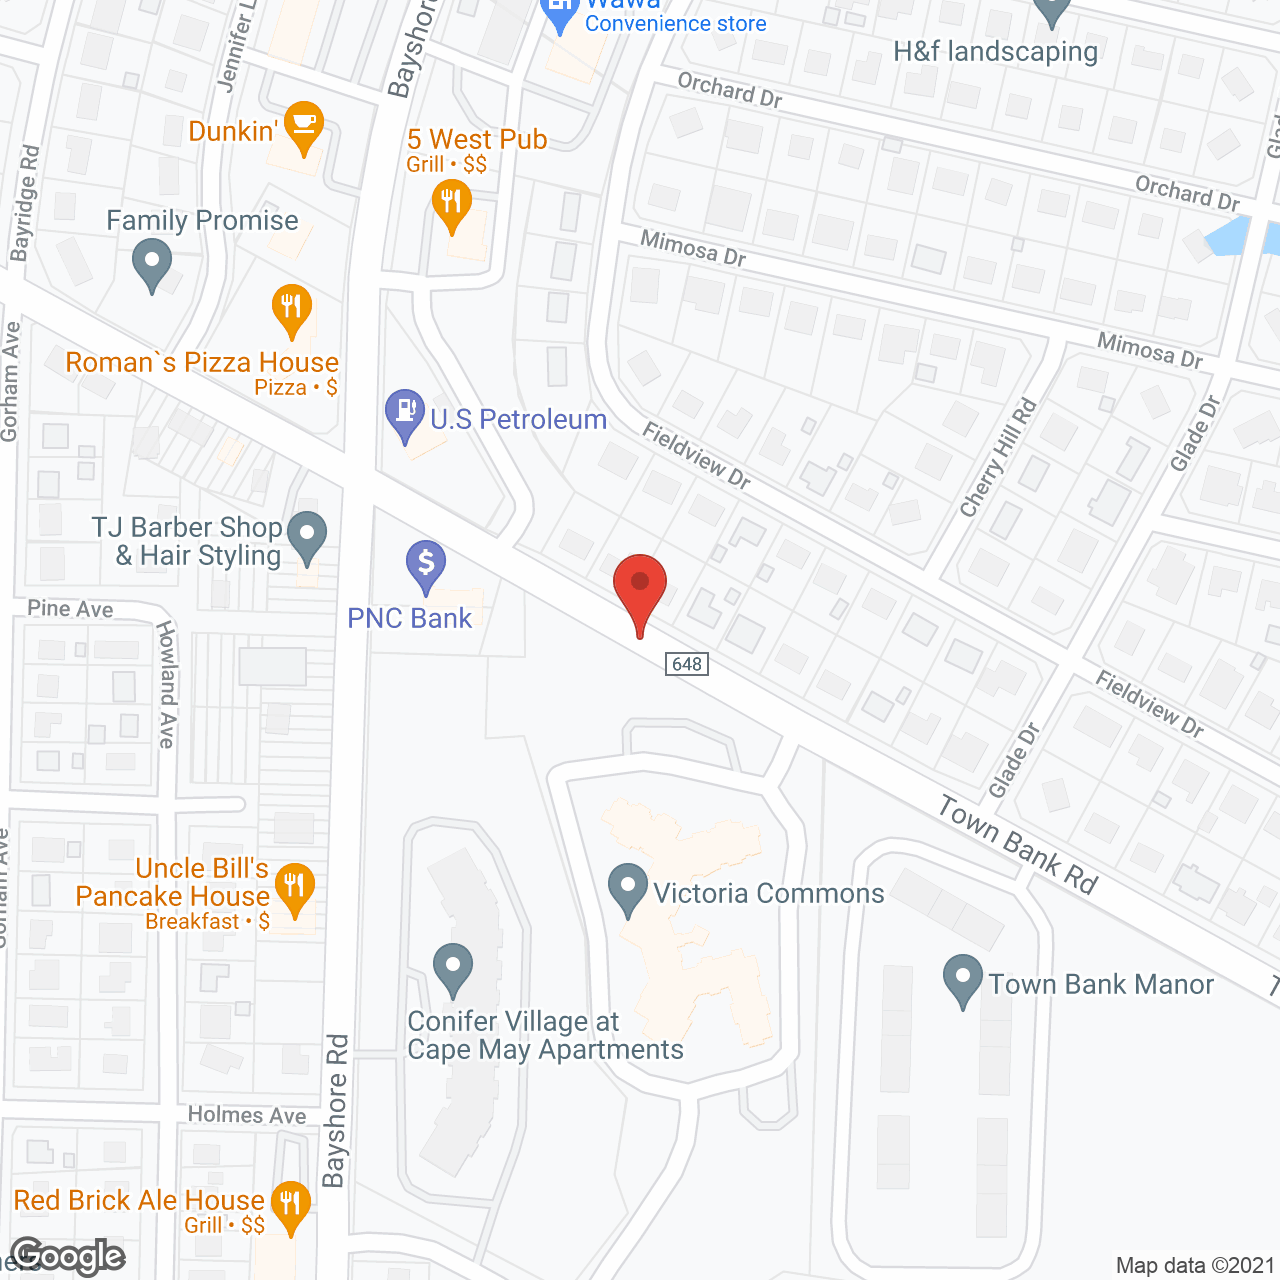 Complete Care at Victoria Commons in google map